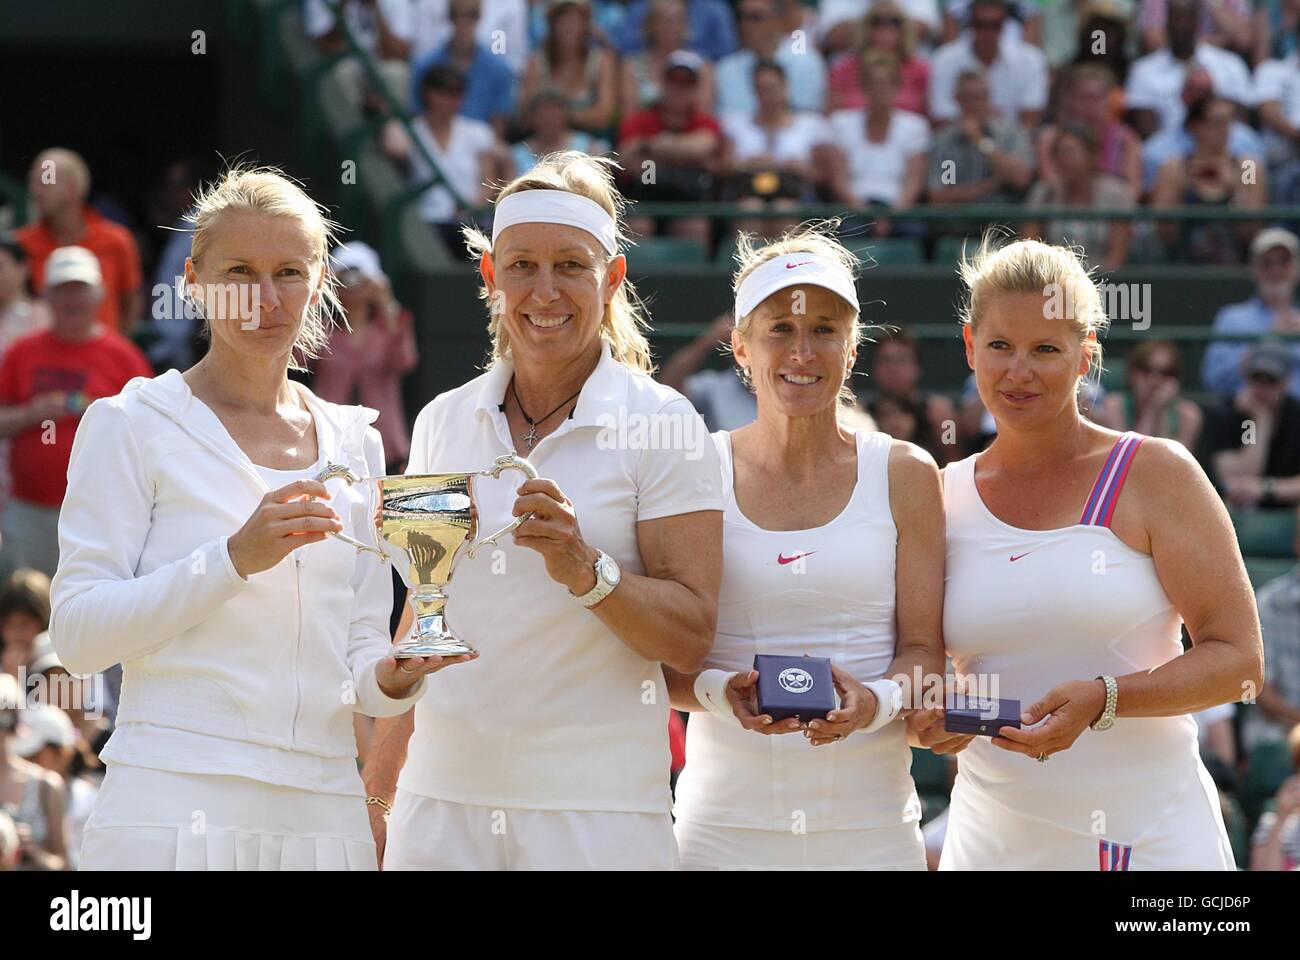 Czech Republic's Jana Novotna (left) and USA's Martina Navratilova (centre left) pose with their trophy after winning the Ladies' Invitation Doubles final, beating USA's Tracy Austin (centre right) and USA's Kathy Rinaldi-Stunkel (far right) by two sets to love. Stock Photo